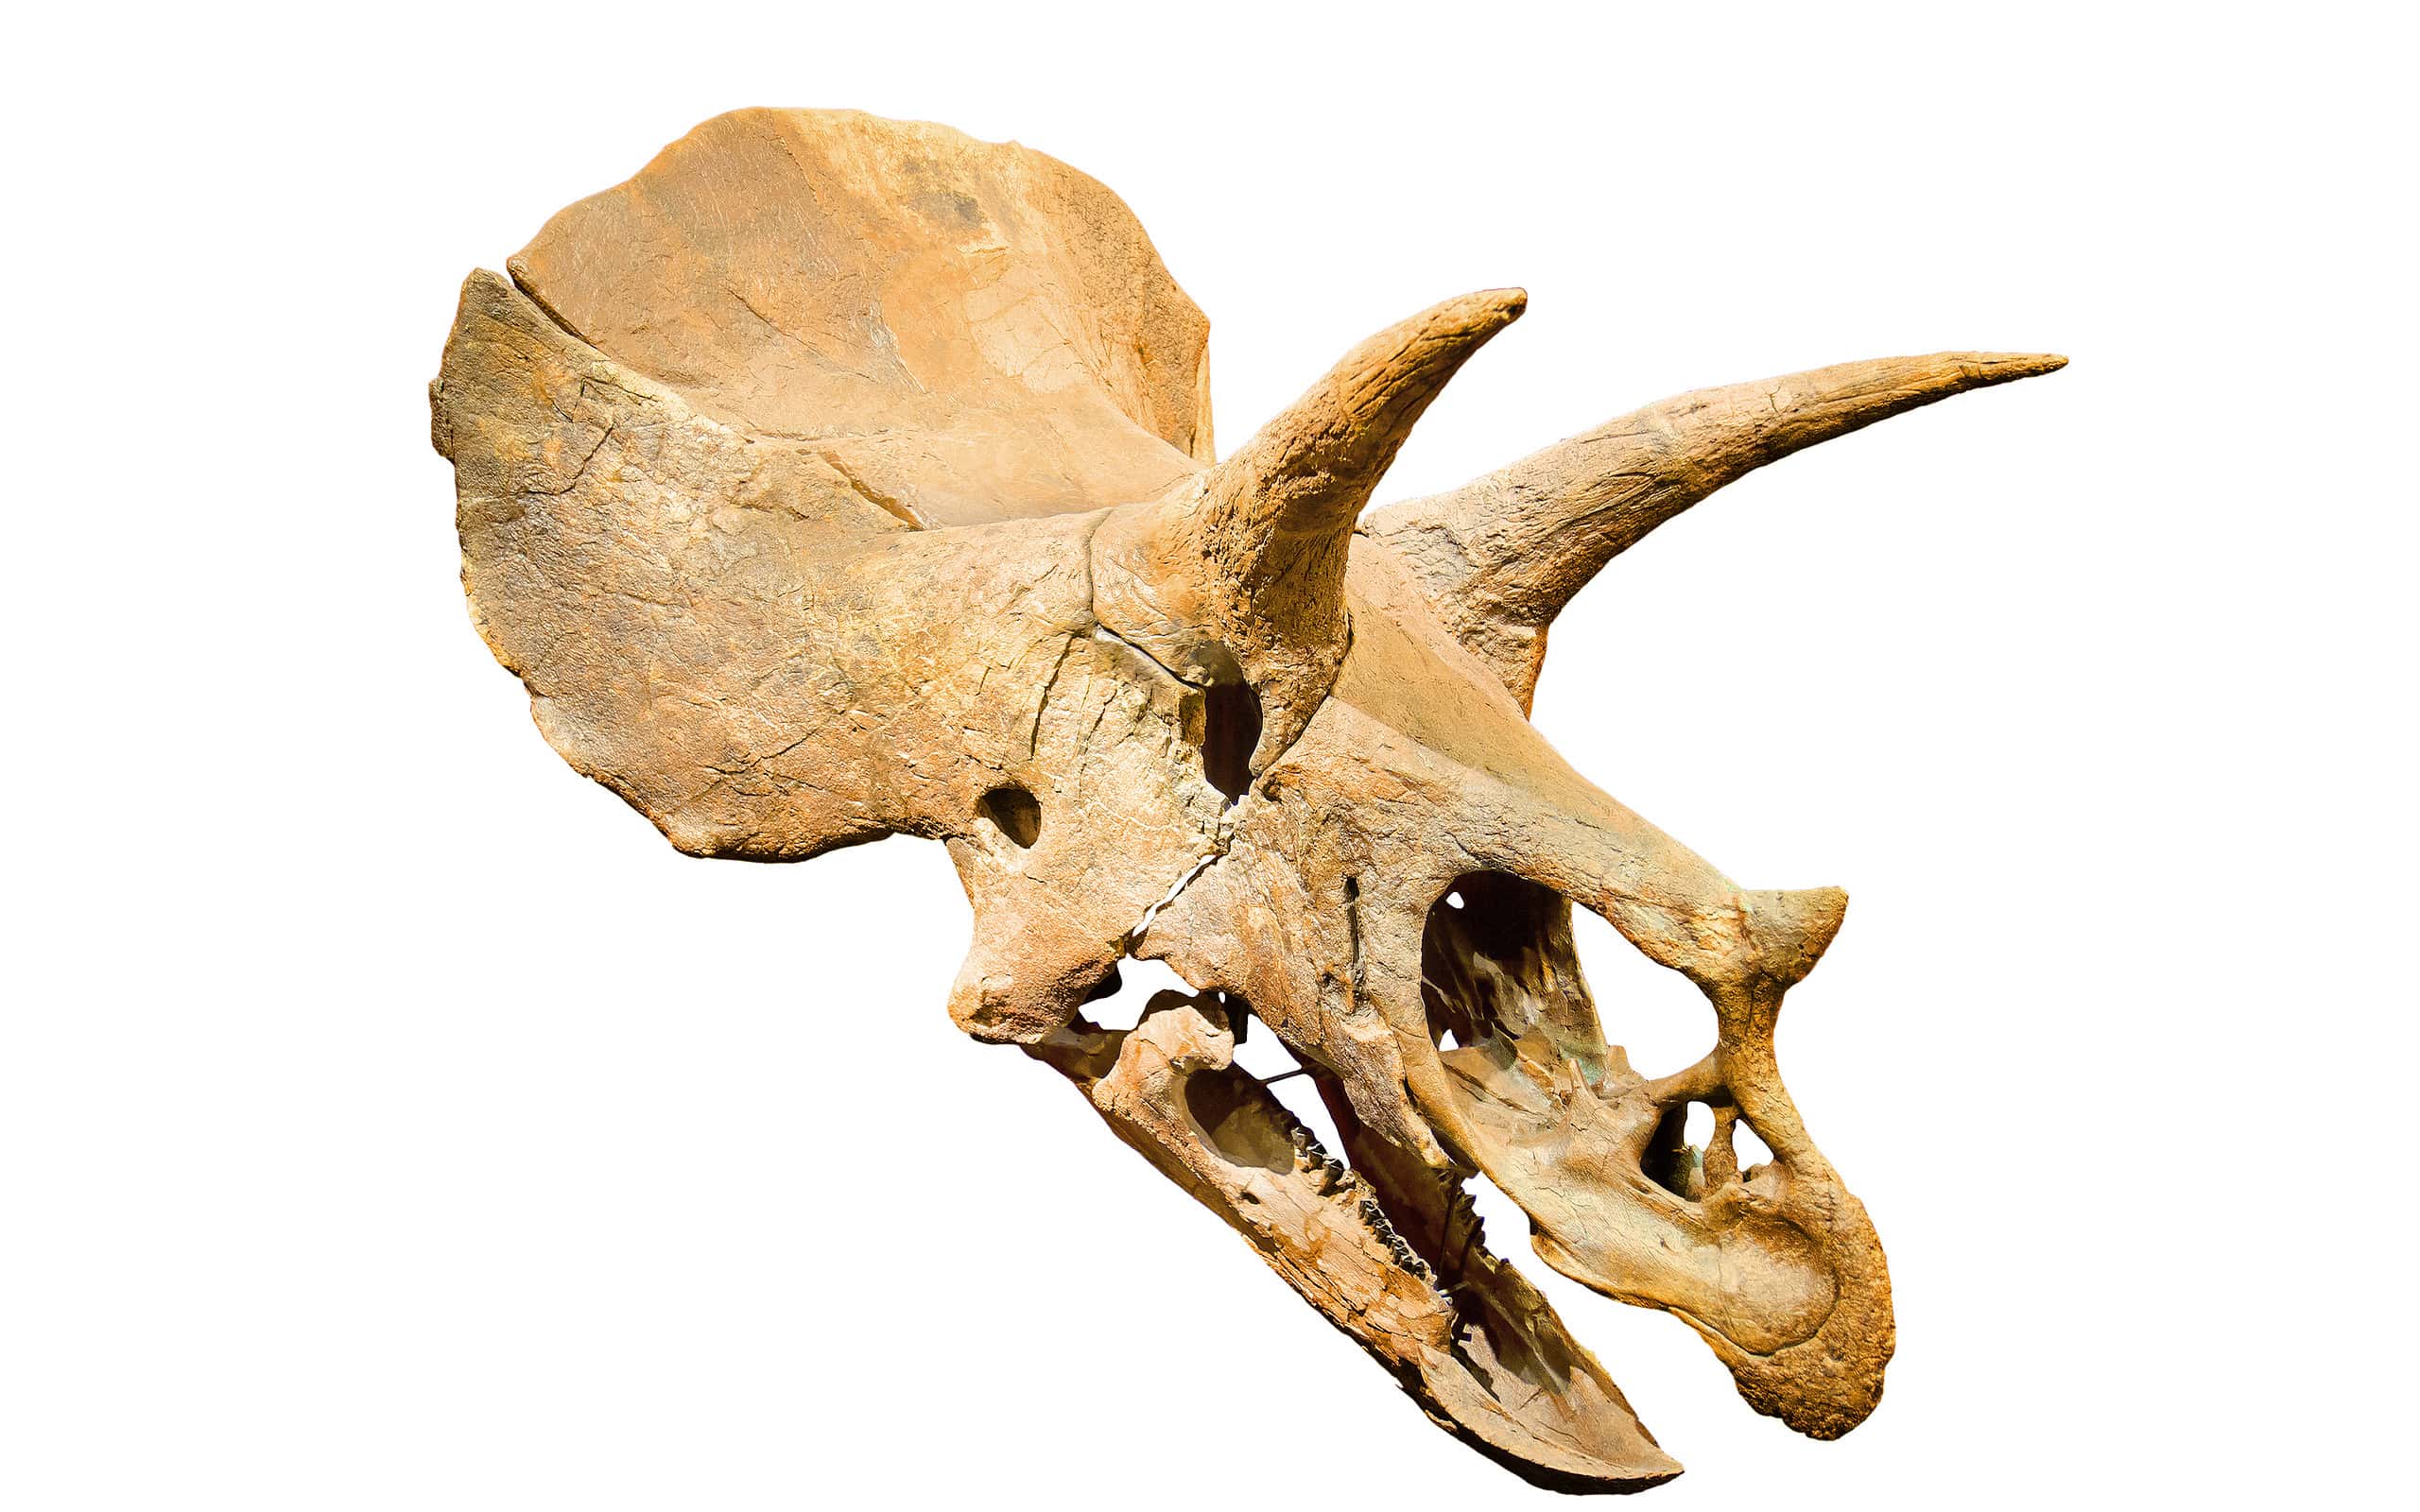 Triceratops Fossil skull over white isolated background